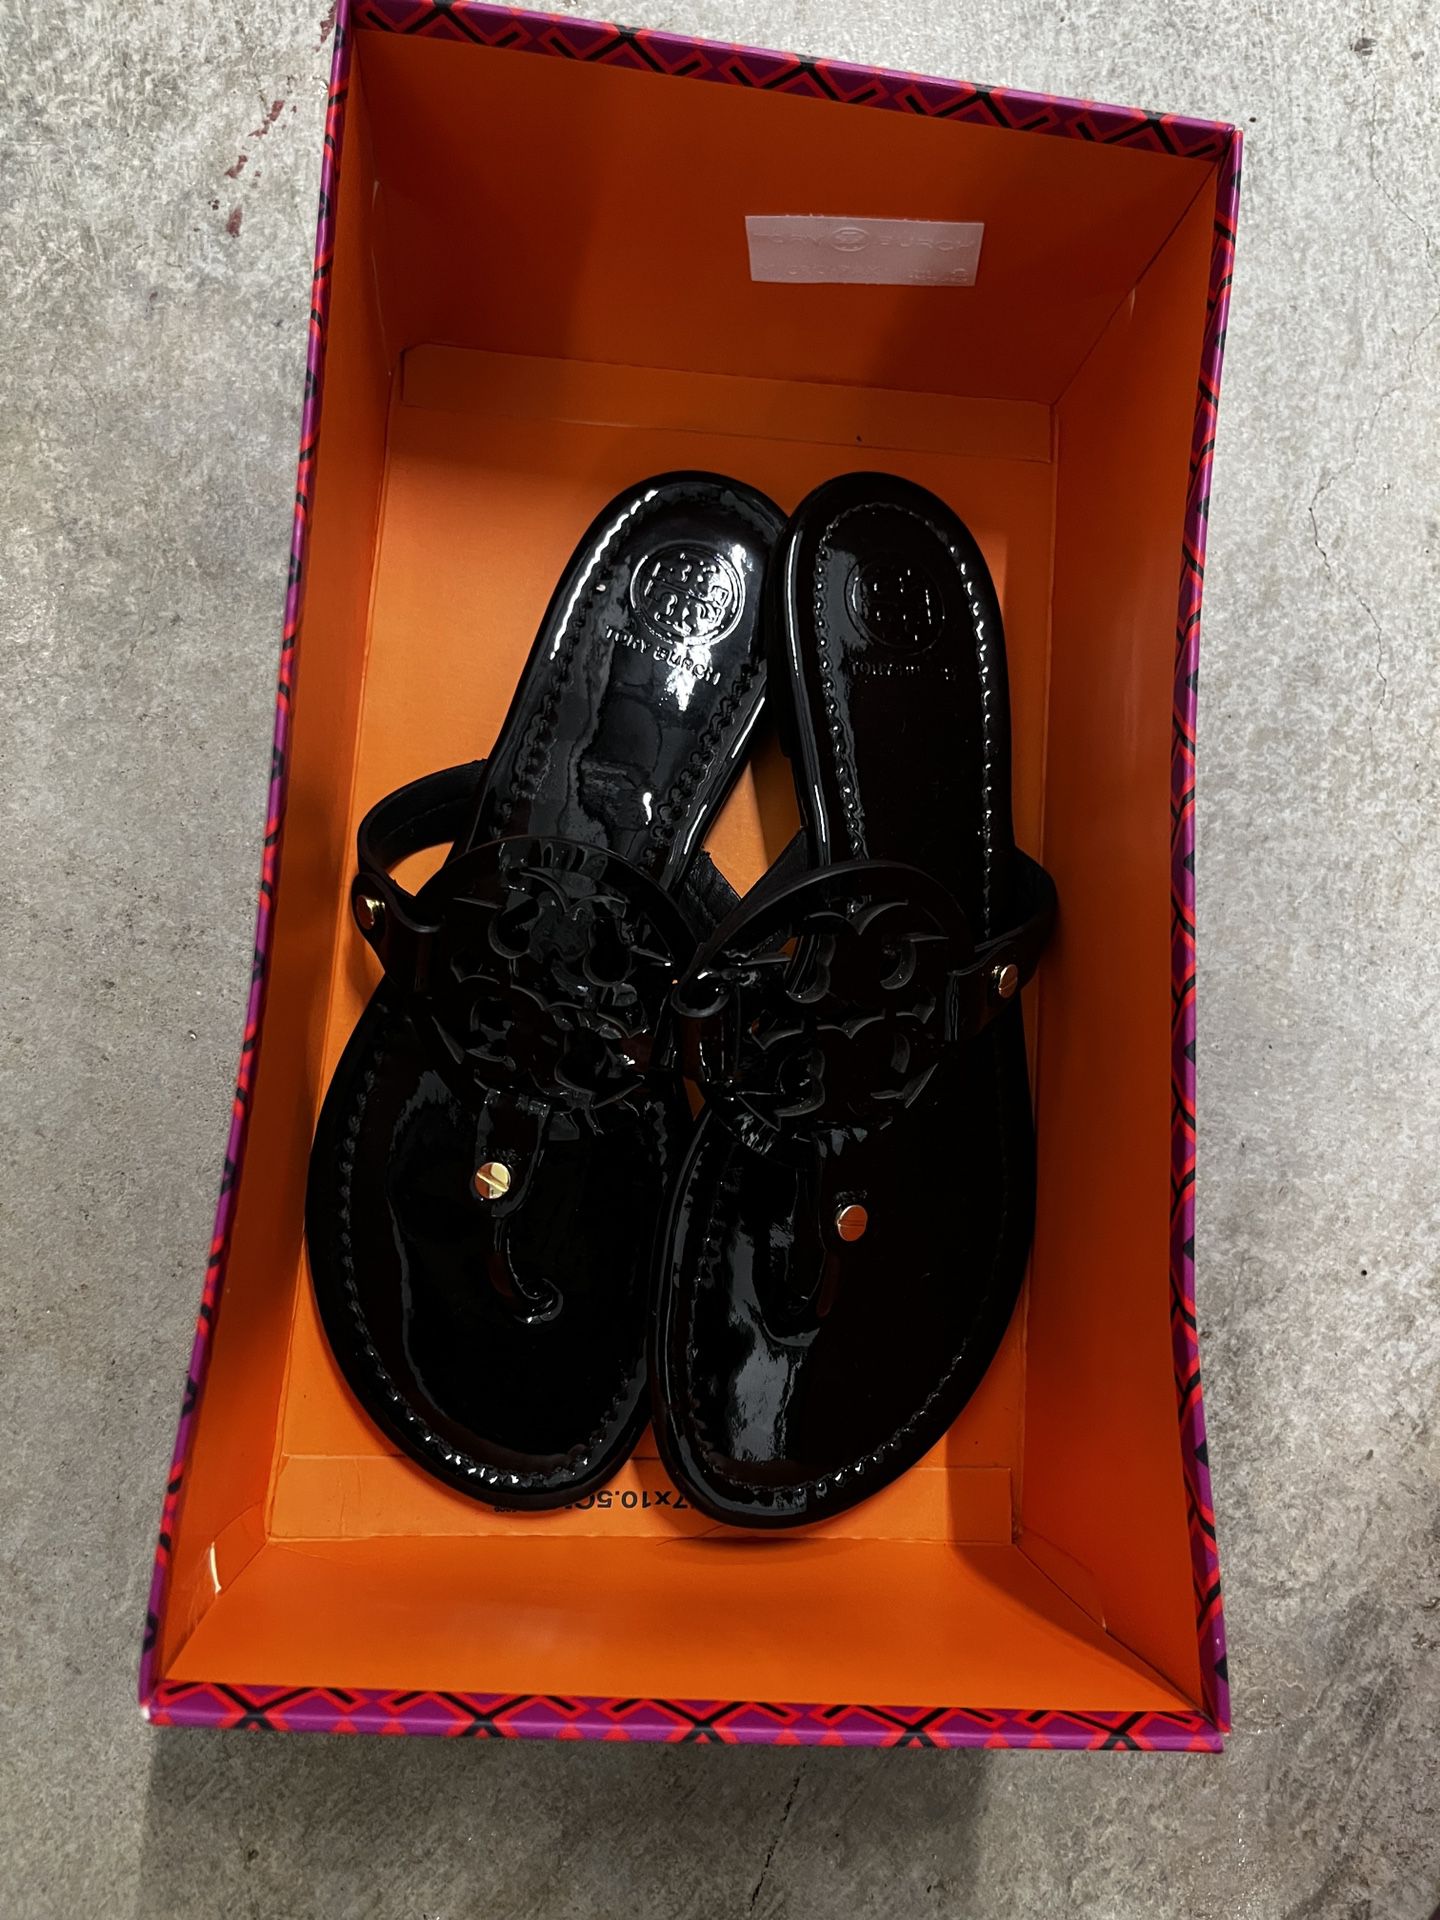 Tory Burch Sandals for Sale in Baltimore, MD - OfferUp